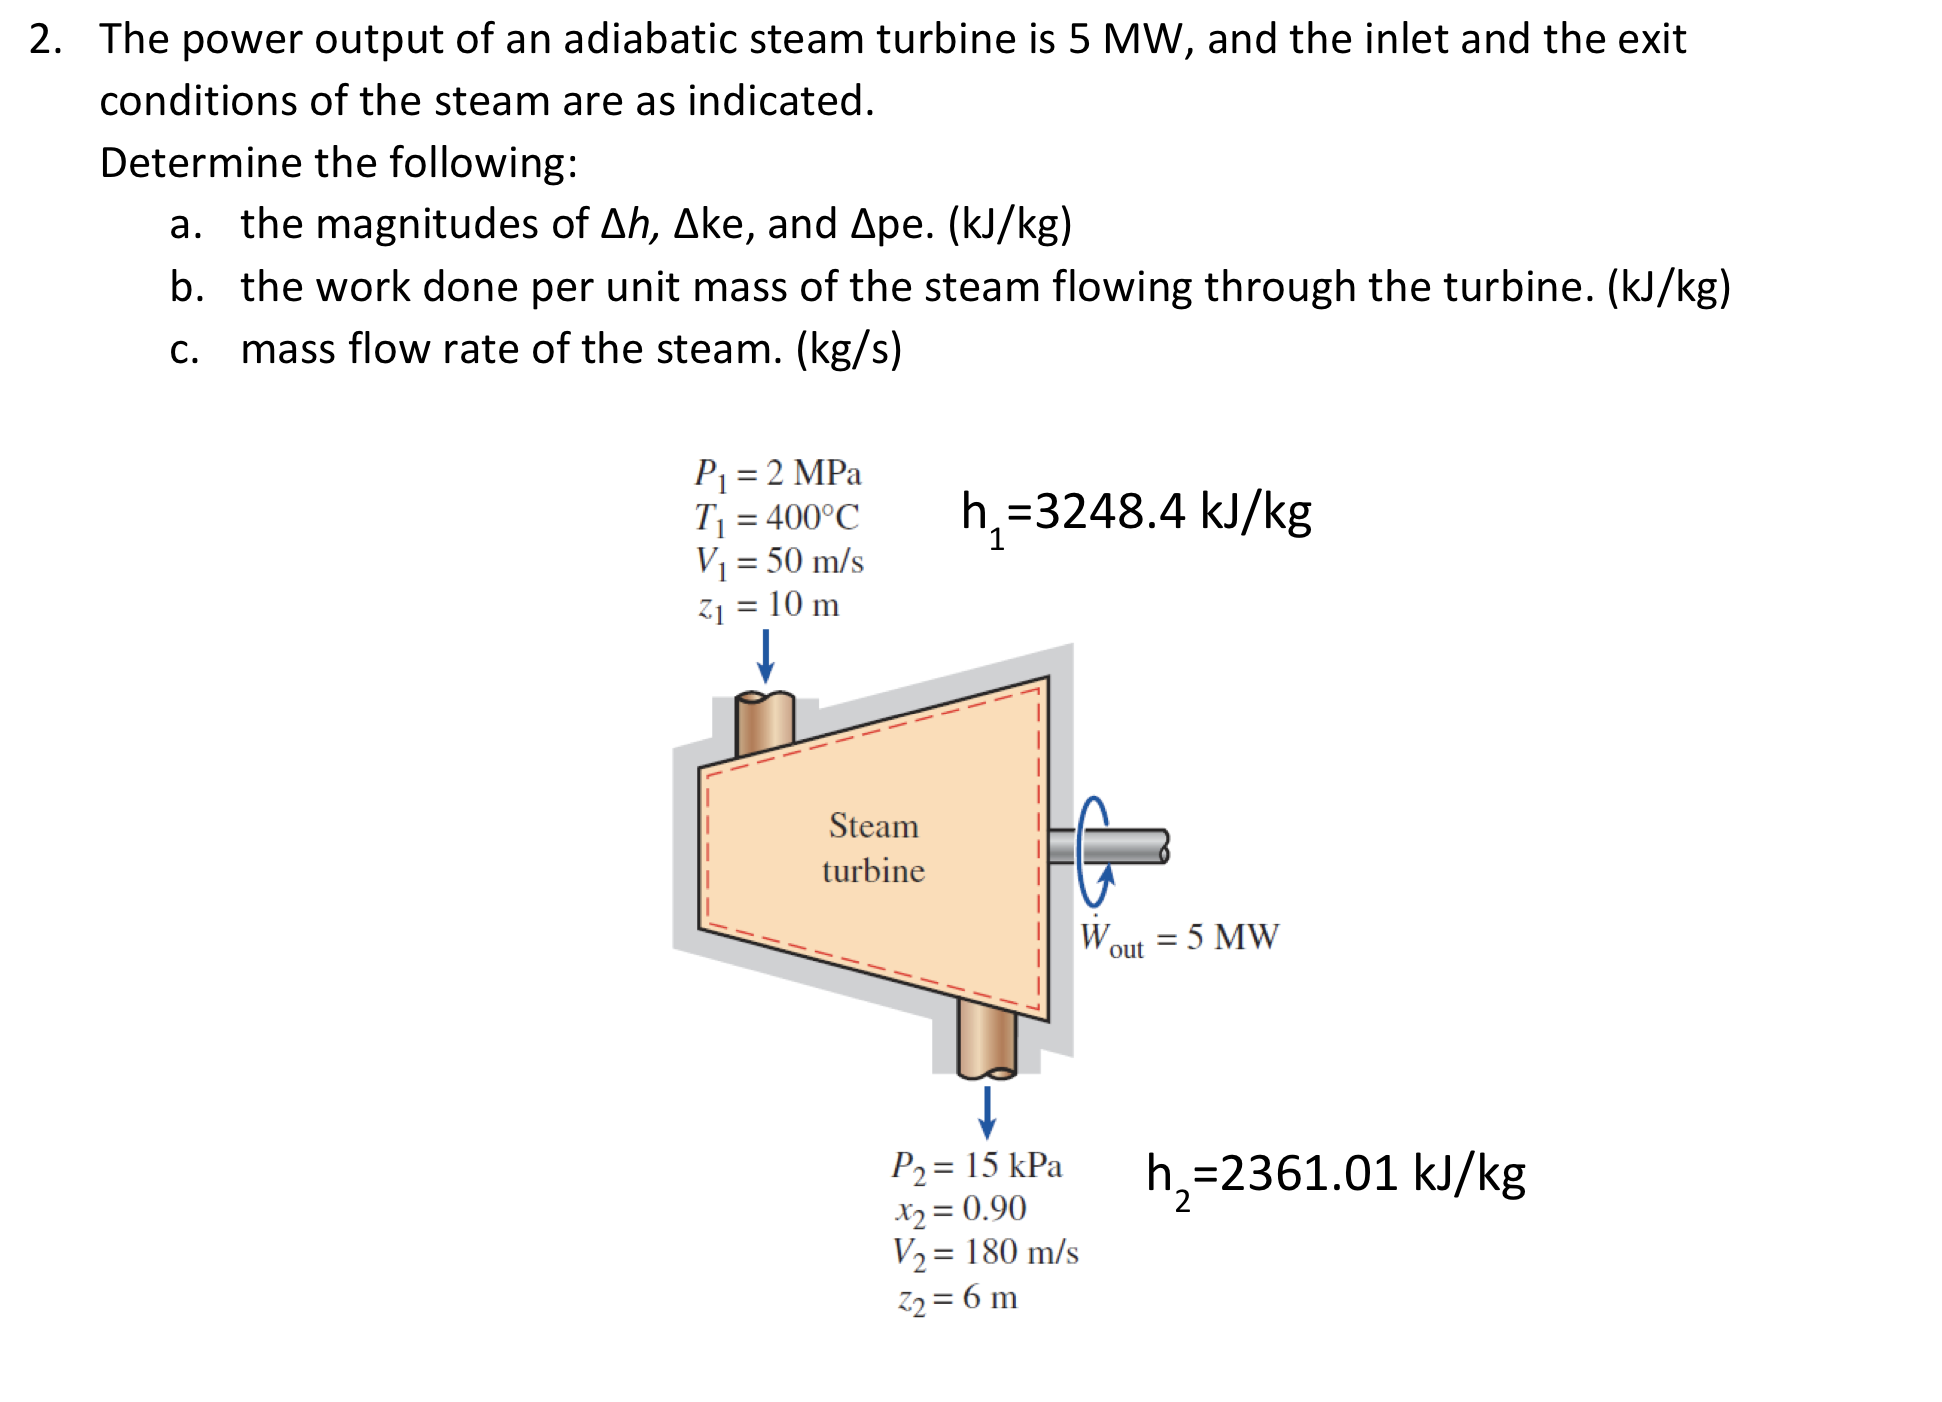 The power output of an adiabatic steam turbine is 5 MW, and the inlet and the exit
conditions of the steam are as indicated.
Determine the following:
a. the magnitudes of Ah, Ake, and Ape. (kJ/kg)
b. the work done per unit mass of the steam flowing through the turbine. (kJ/kg)
mass flow rate of the steam. (kg/s)
С.
P1 = 2 MPa
Tj = 400°C
V1 = 50 m/s
h,=3248.4 kJ/kg
Z1 = 10 m
%3D
Steam
turbine
Wout = 5 MW
P2= 15 kPa
X2 = 0.90
V2= 180 m/s
h,=2361.01 kJ/kg
72 = 6 m
